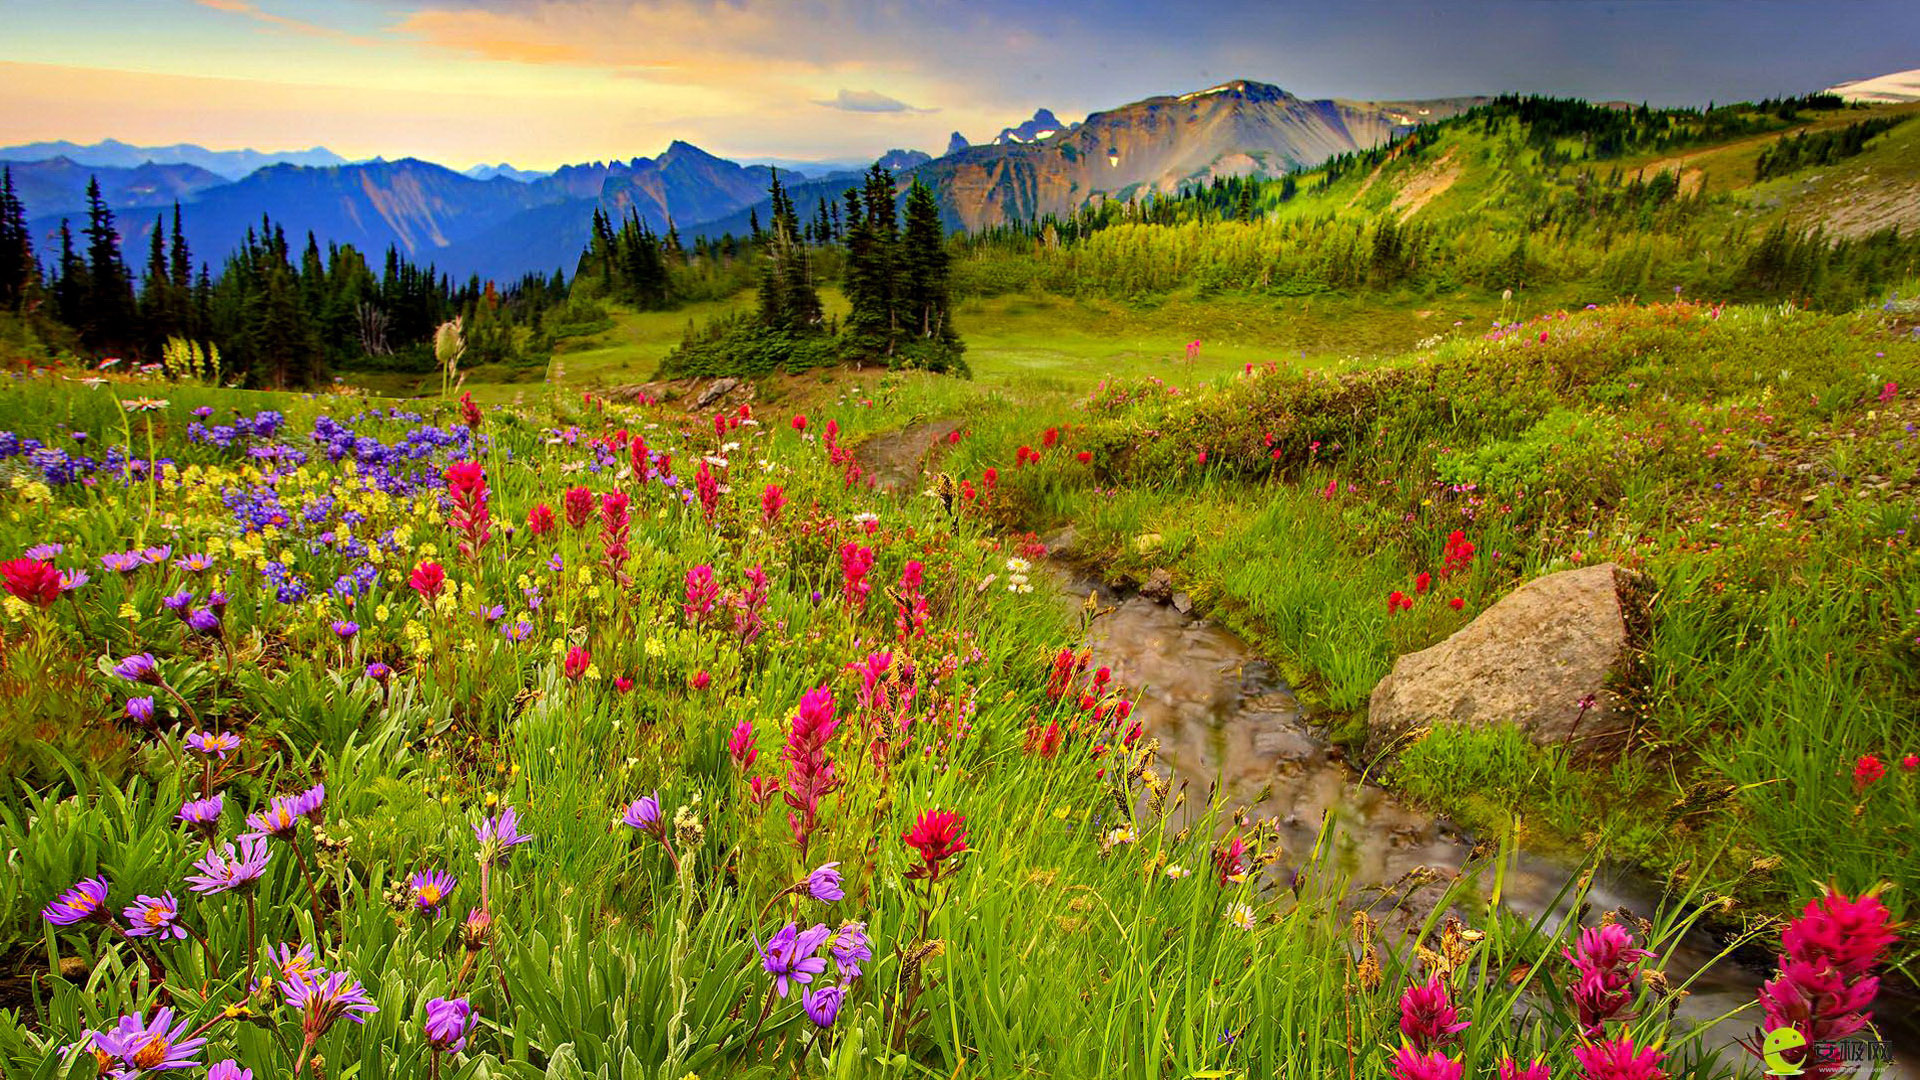 Meadow And Mountains Colorful Flowers Meadow With Grass Green Mountain Stream Stone Pine Trees Sharp Mountain Peaks Landscape HD Wallpaper, Wallpaper13.com